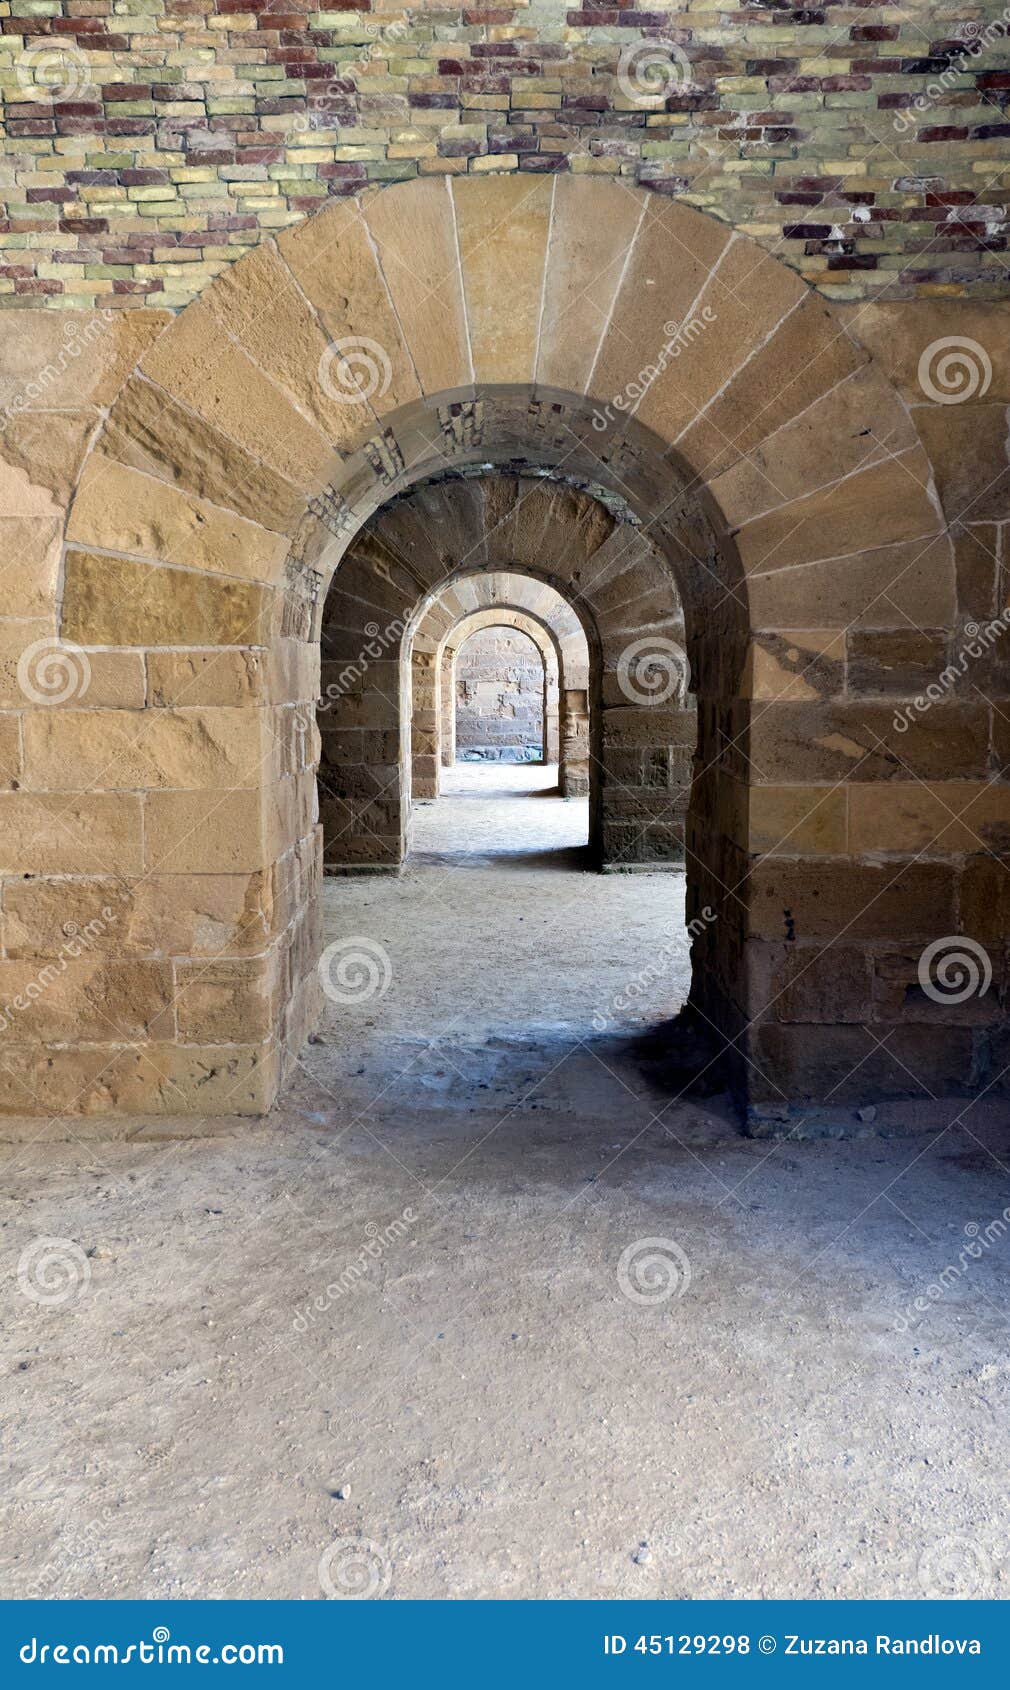 a passageway with round arches